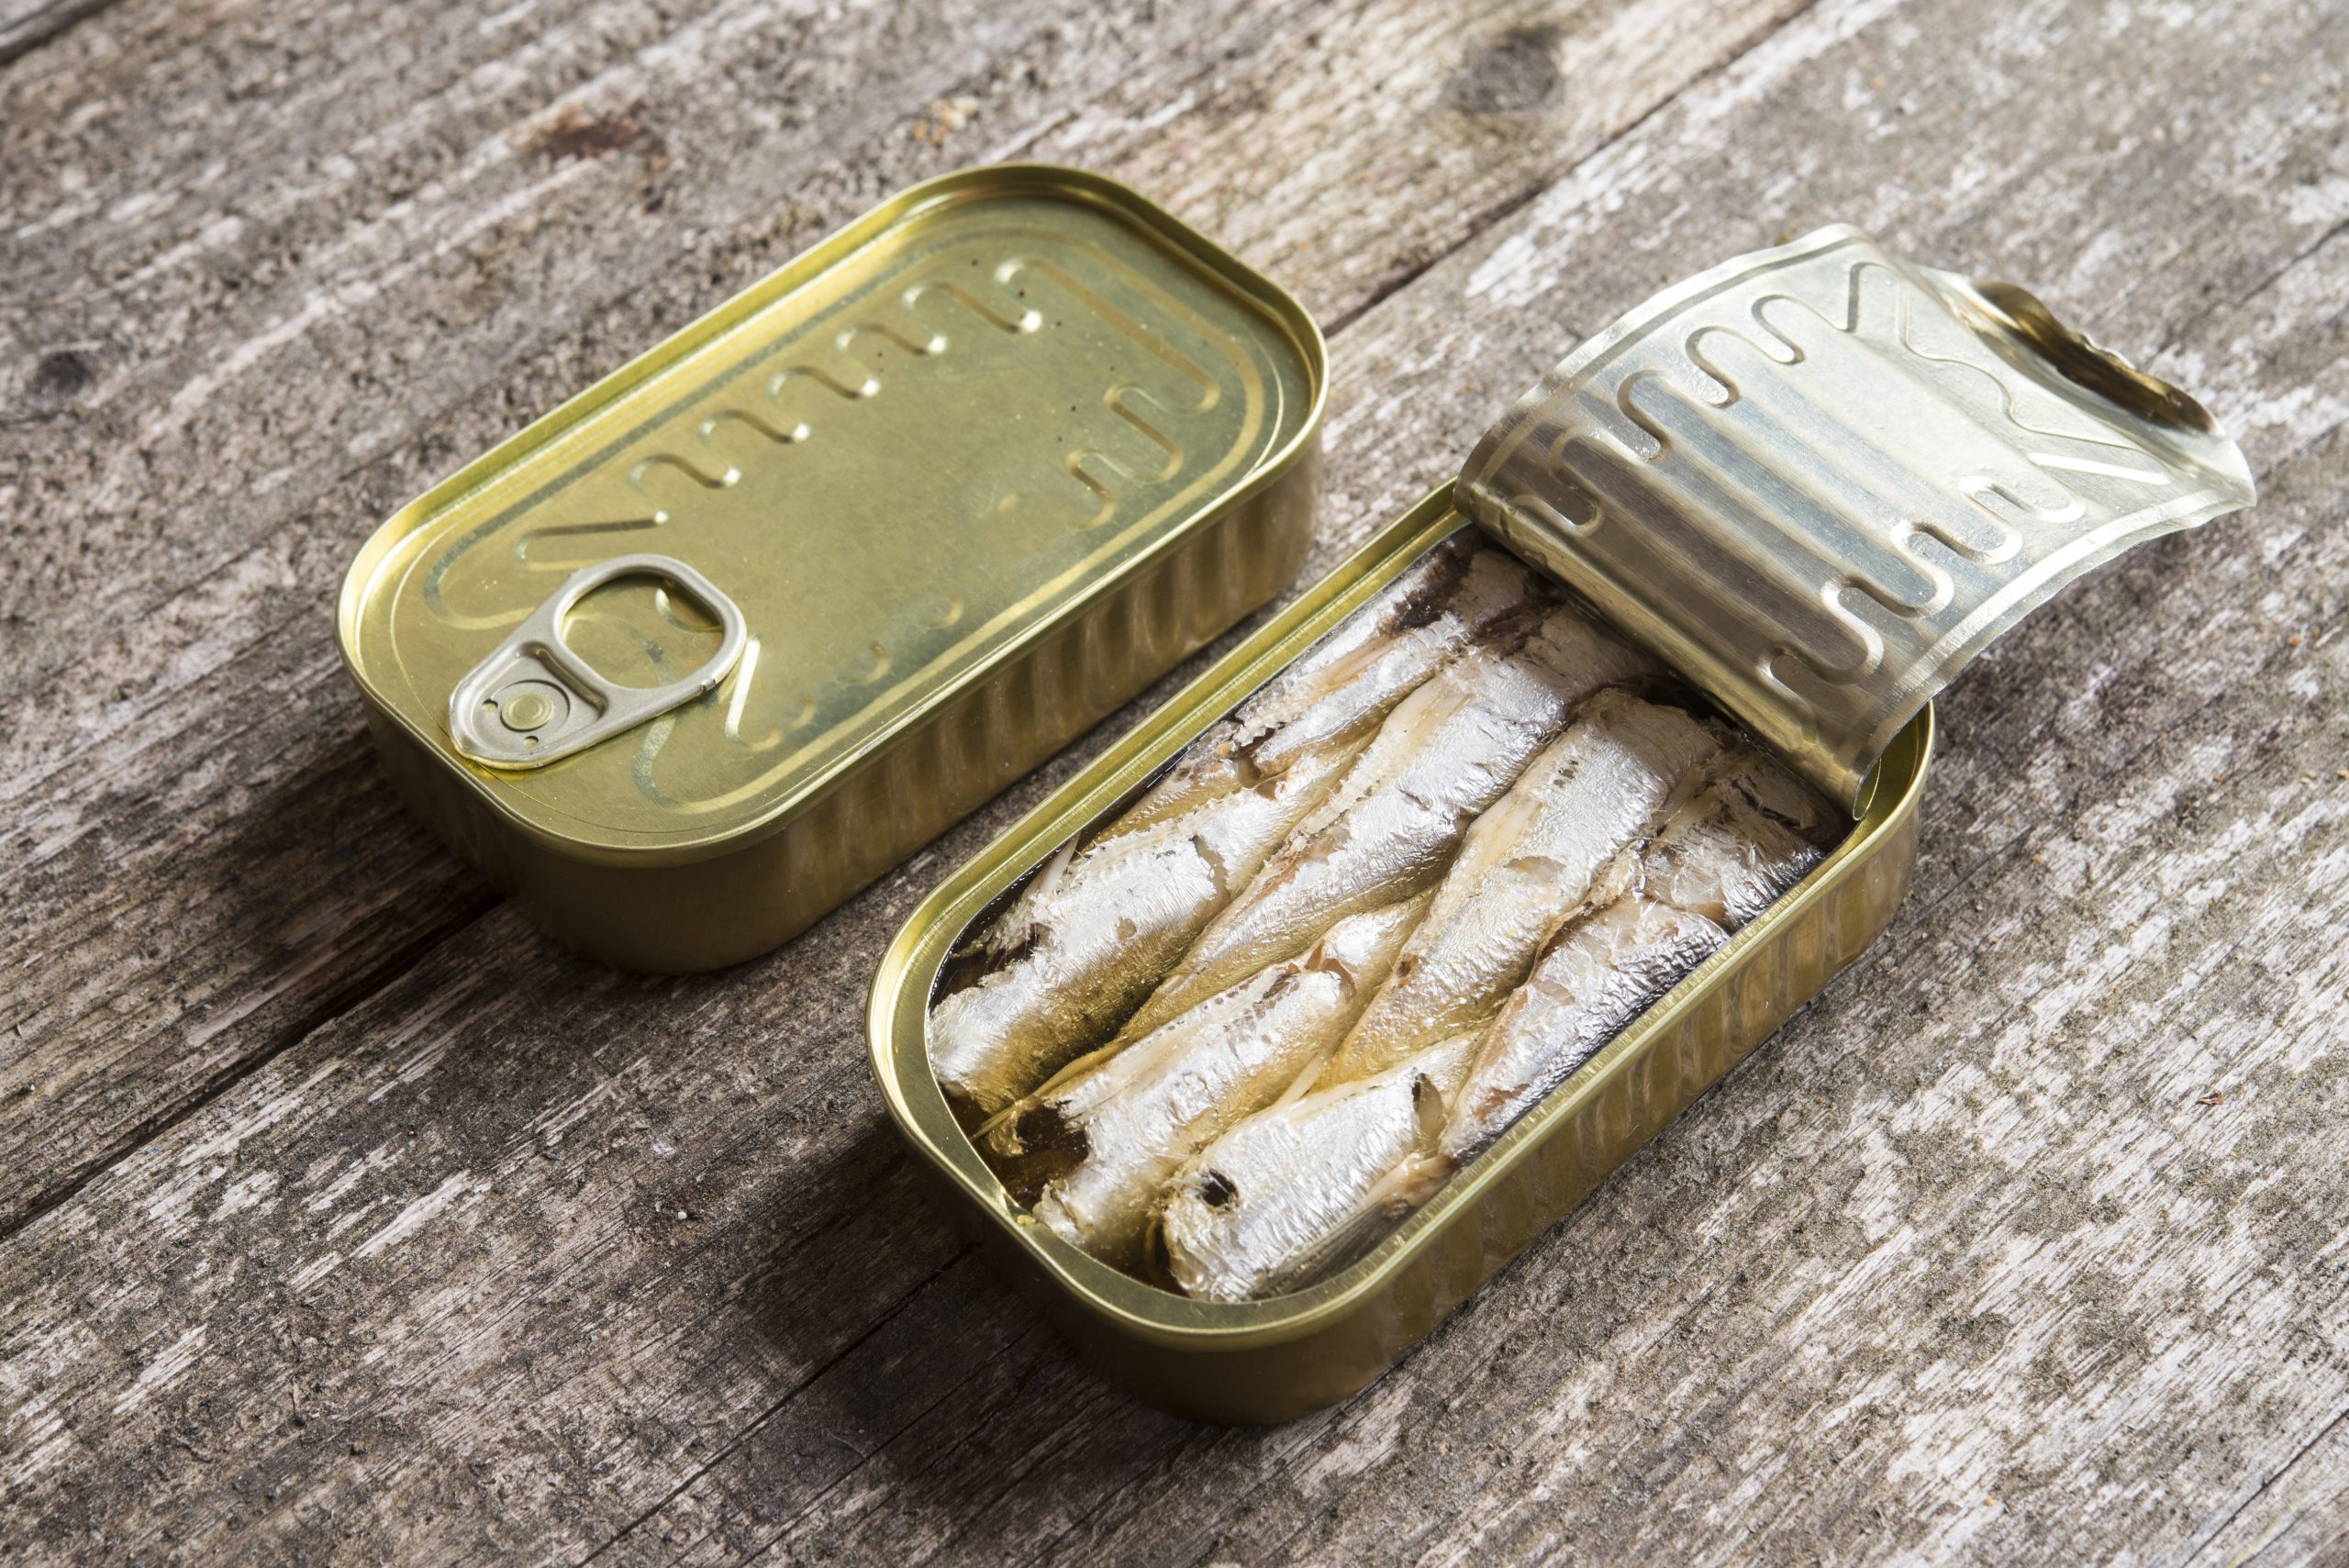 Is tinned fish bad for cholesterol